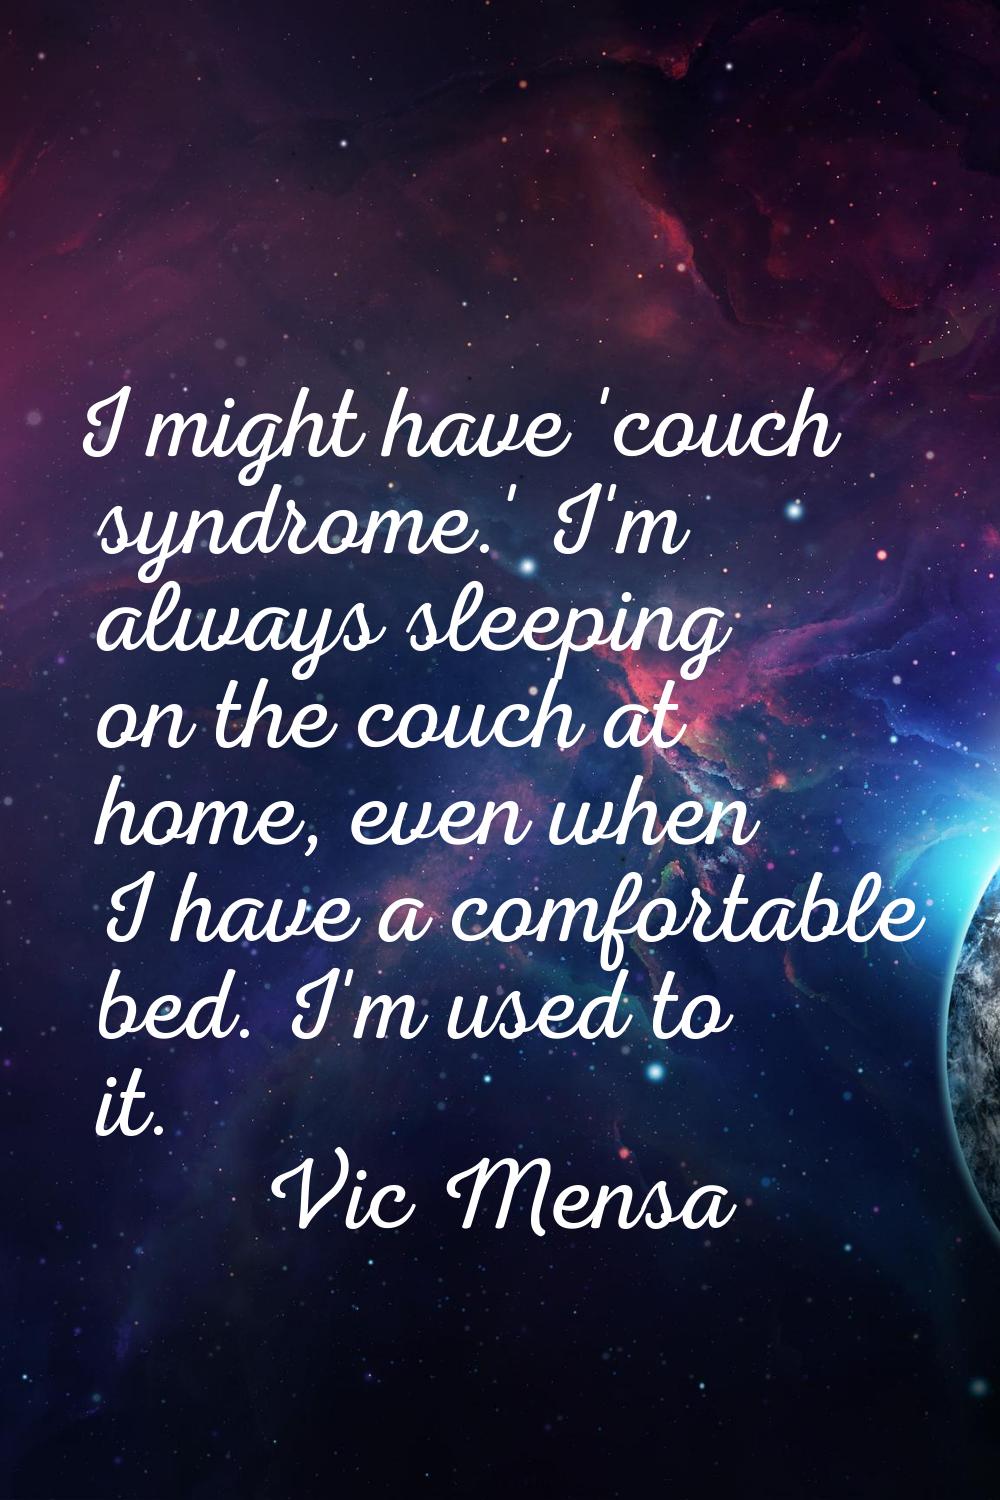 I might have 'couch syndrome.' I'm always sleeping on the couch at home, even when I have a comfort